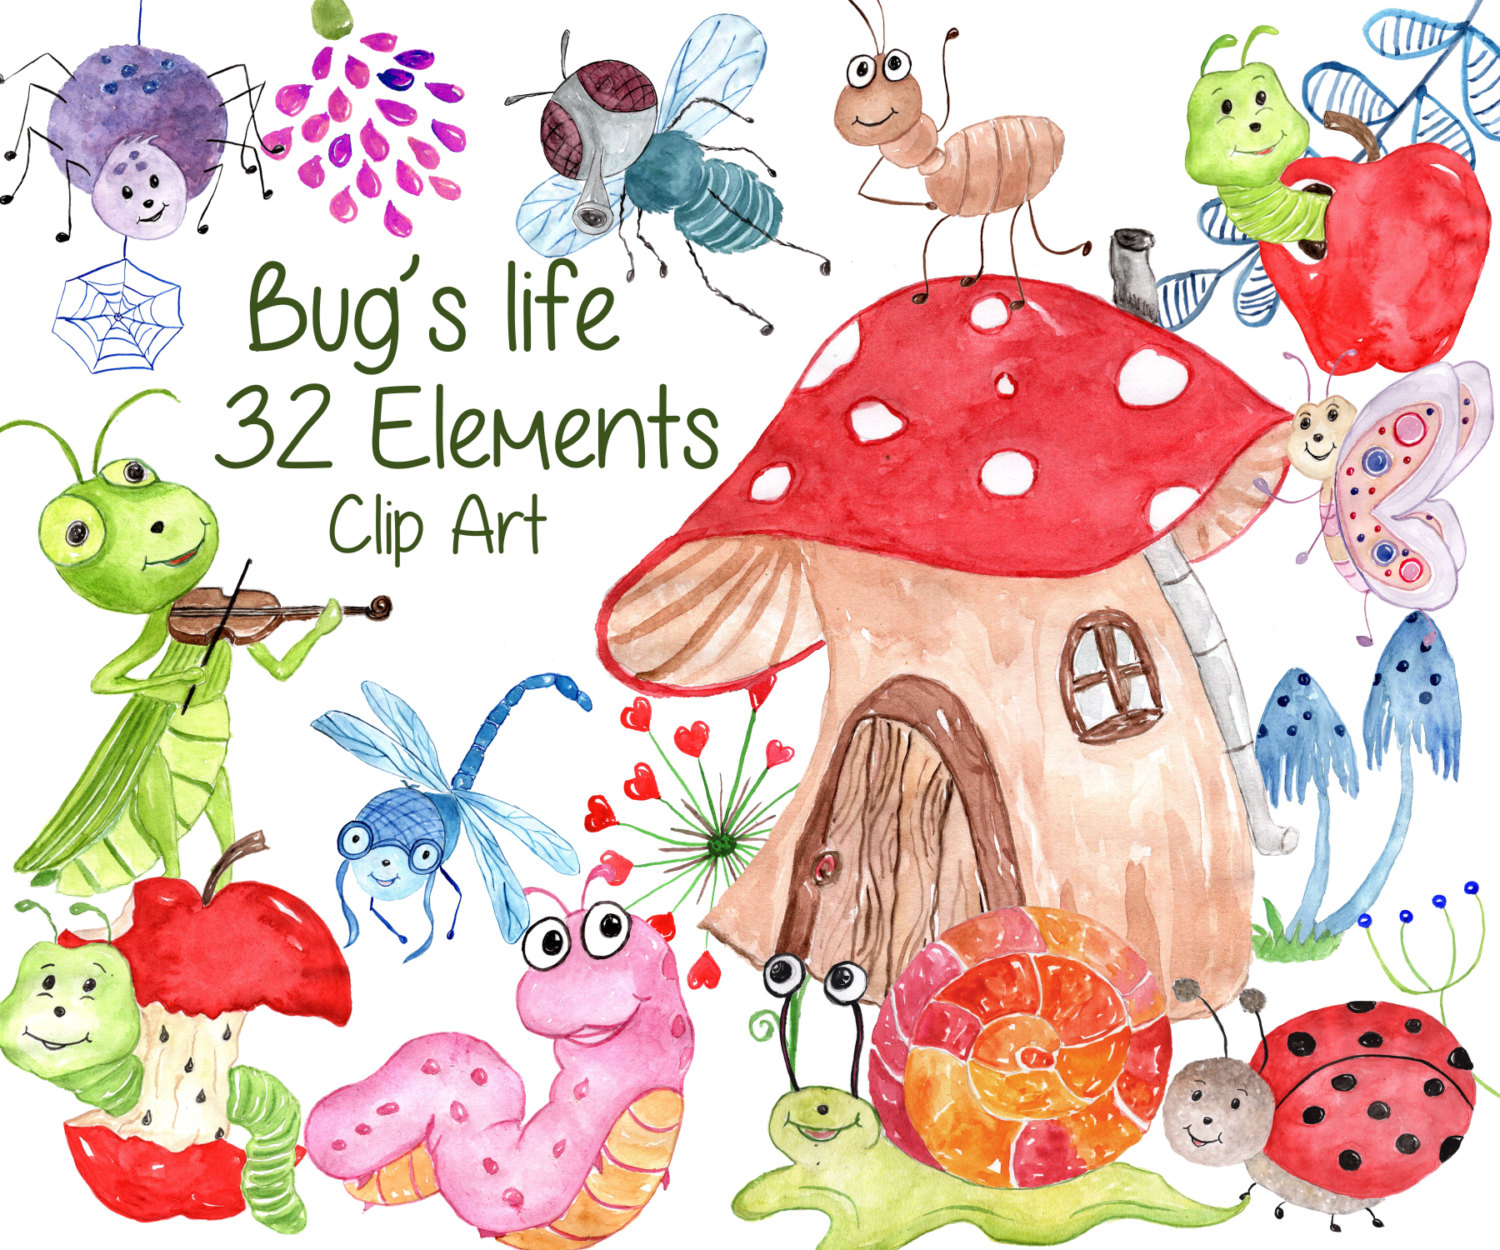 Cute spiders and insect clipart 